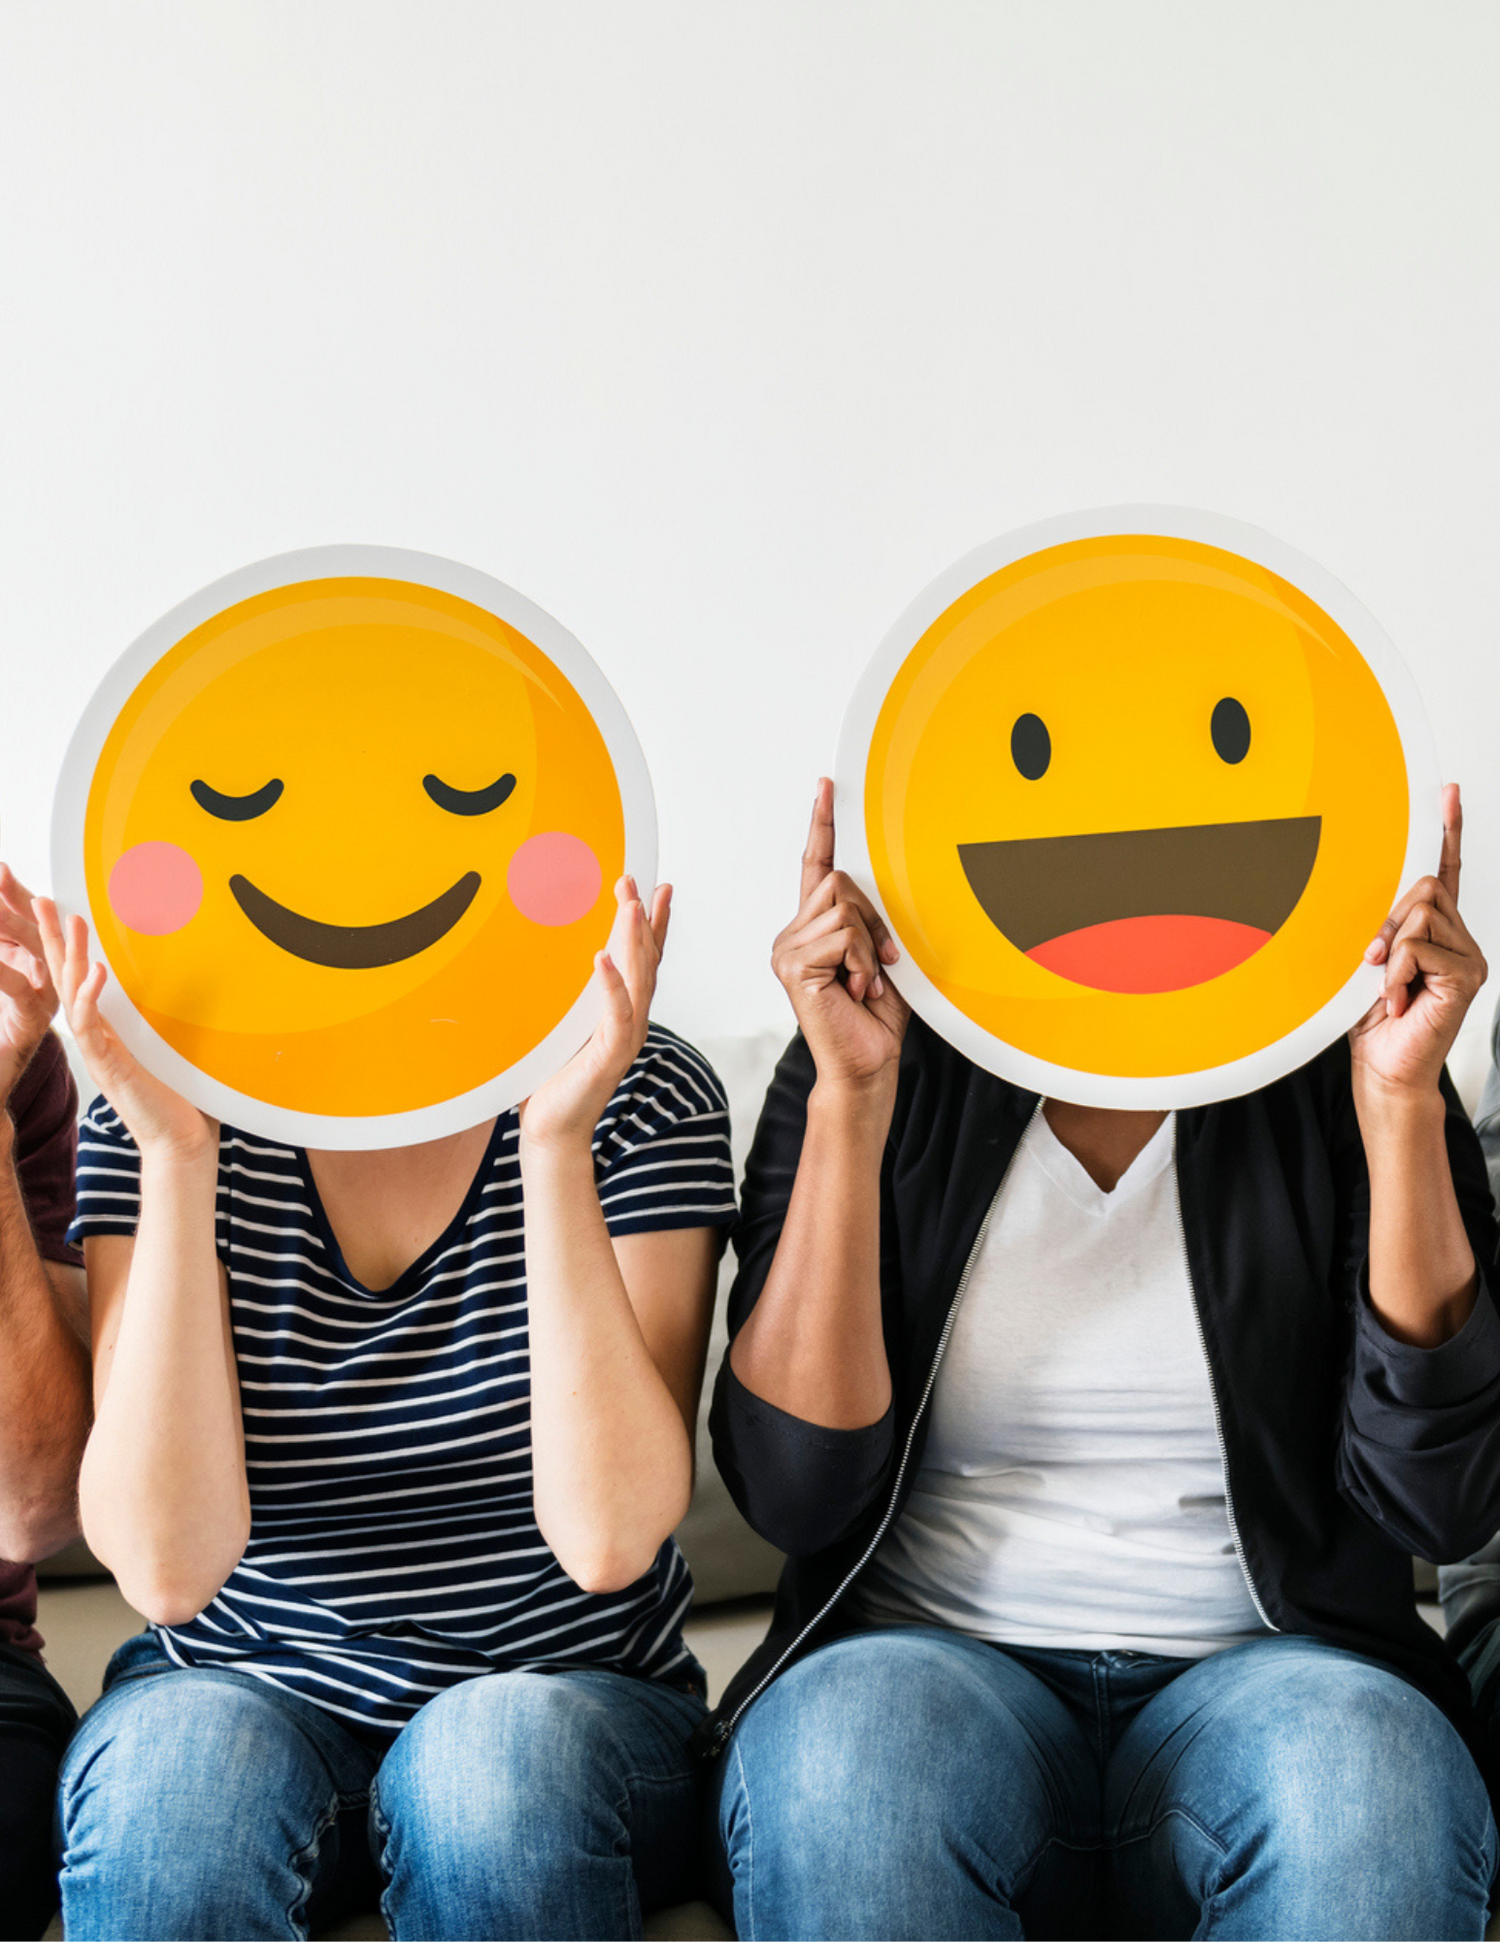 Two individuals sitting on a couch holding different smiling face emojis over their faces, having found their happy place.